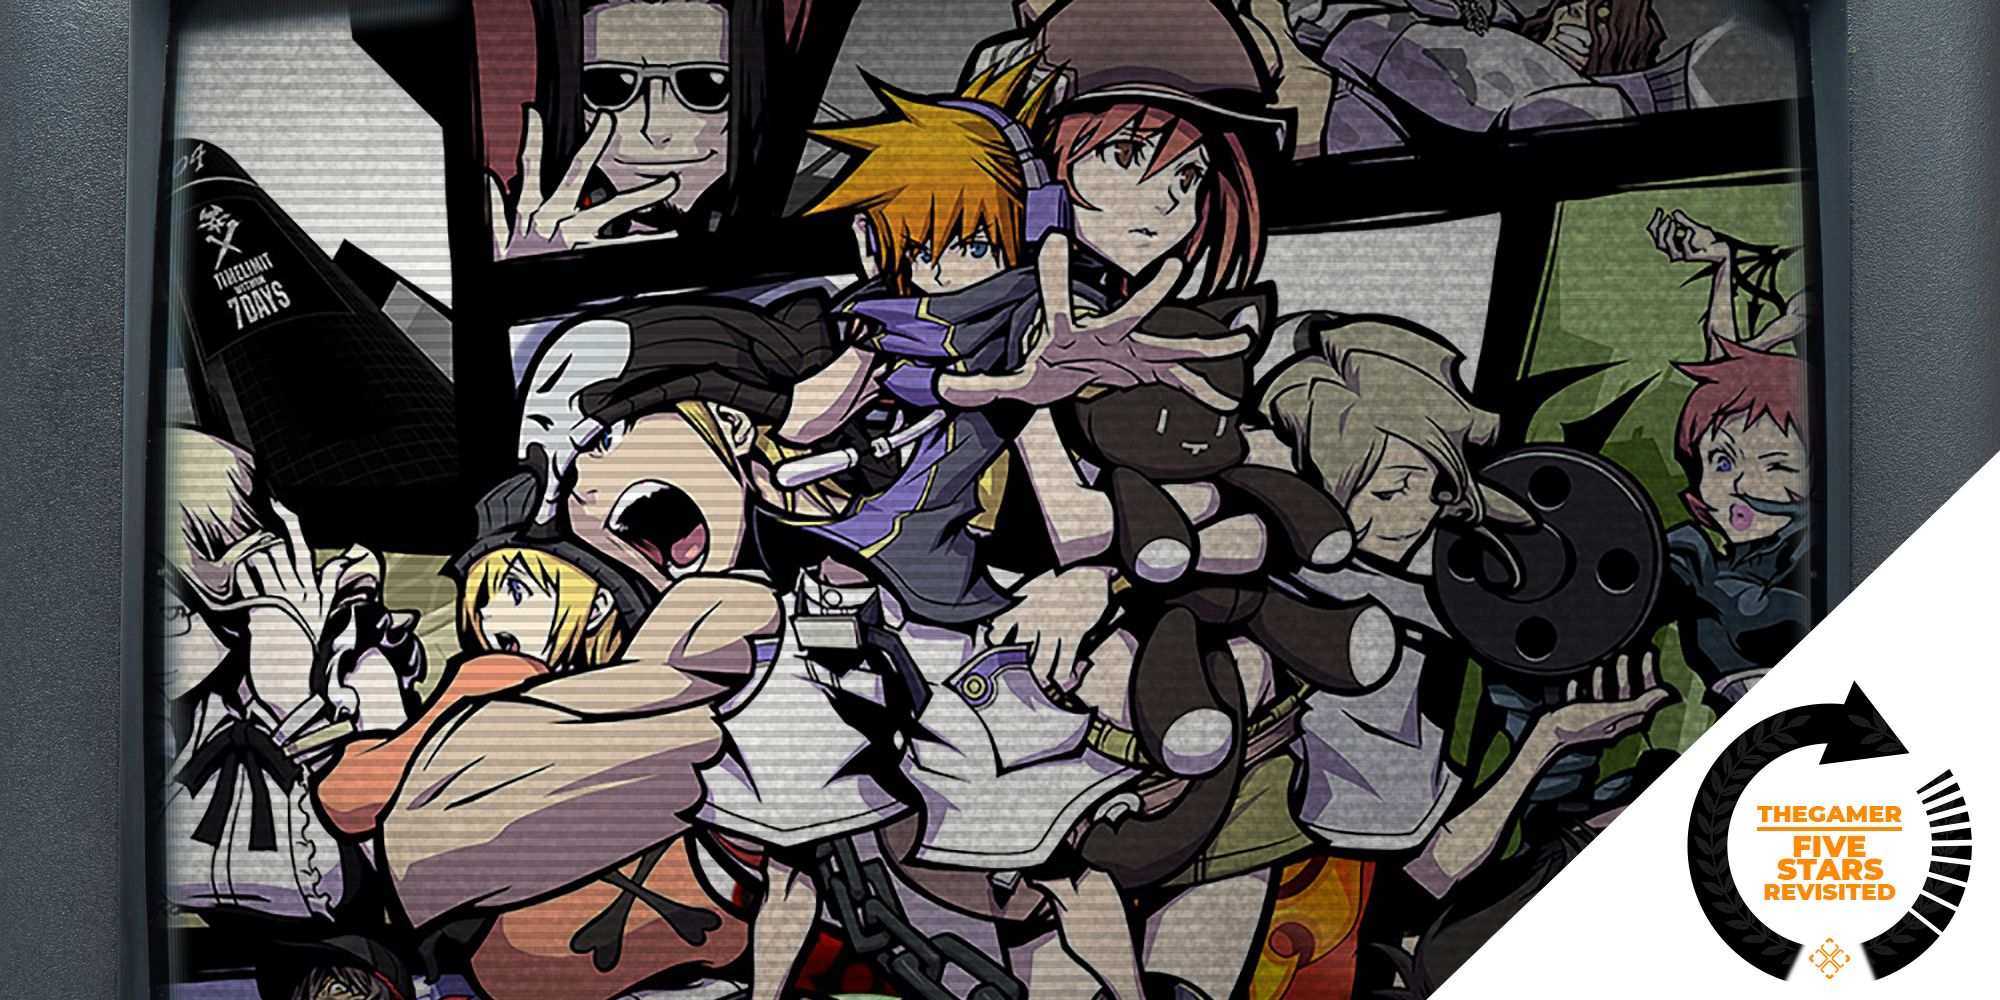 The World Ends With You cover art with TheGamer Five Stars Revisited logo in the corner.